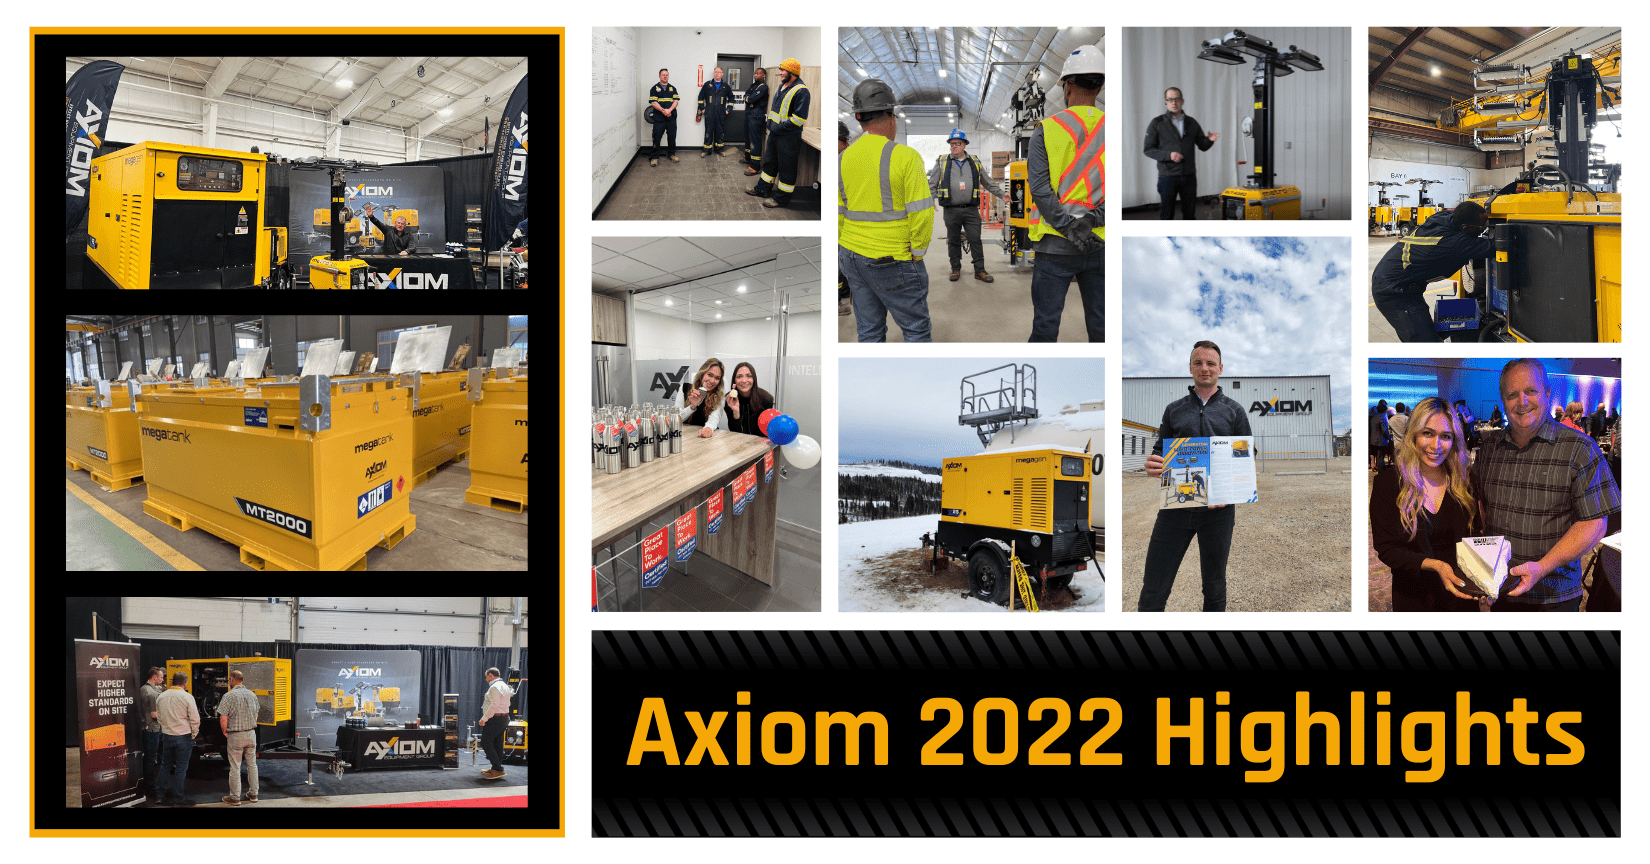 Highlights of the Year for Axiom in 2022